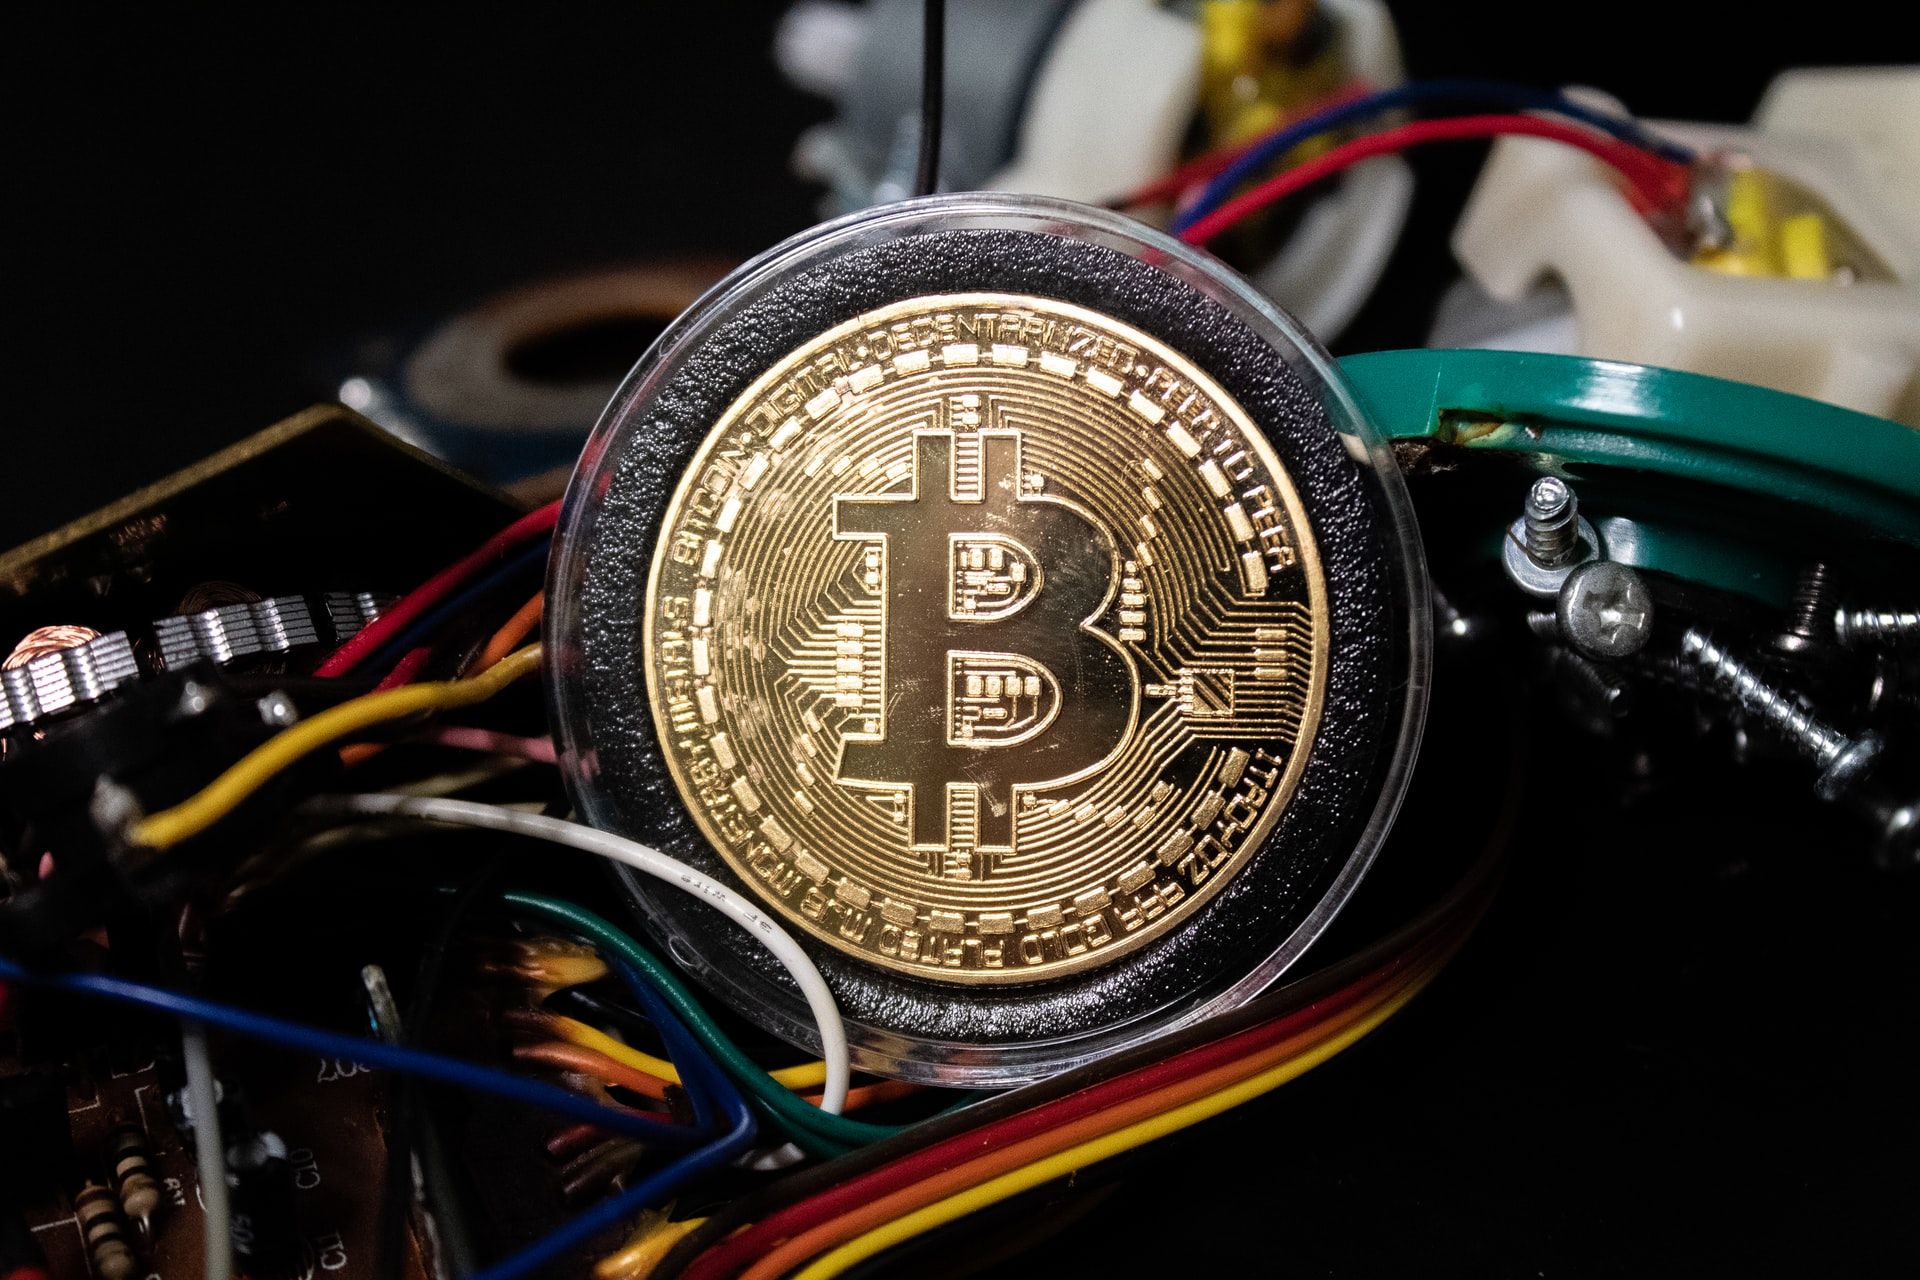 Pexels stock image of a bitcoin leaning against wires on a motherboard